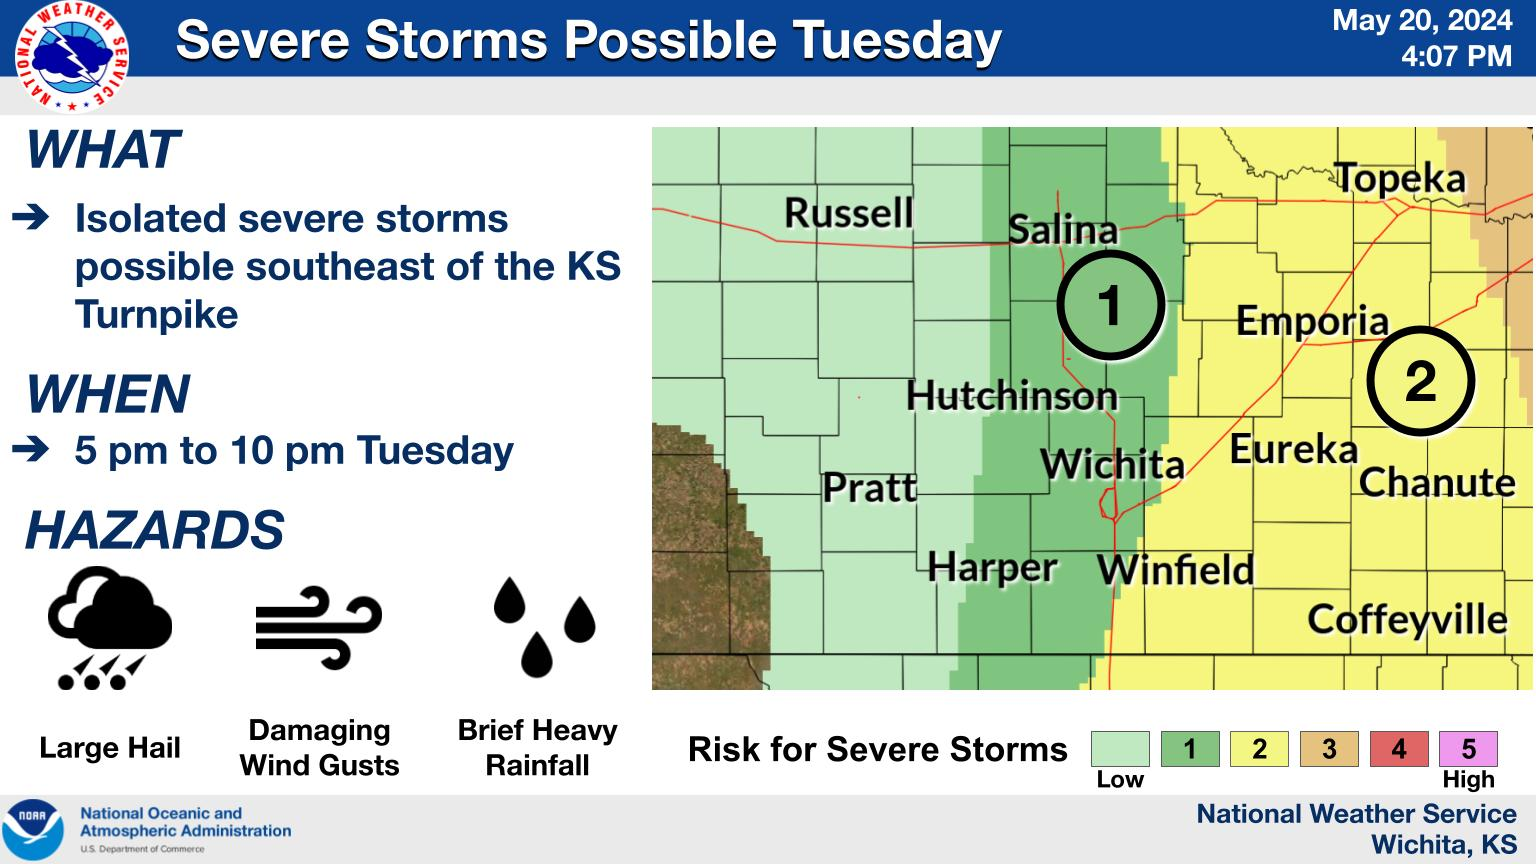 Severe Storms Expected Tuesday and Wednesday